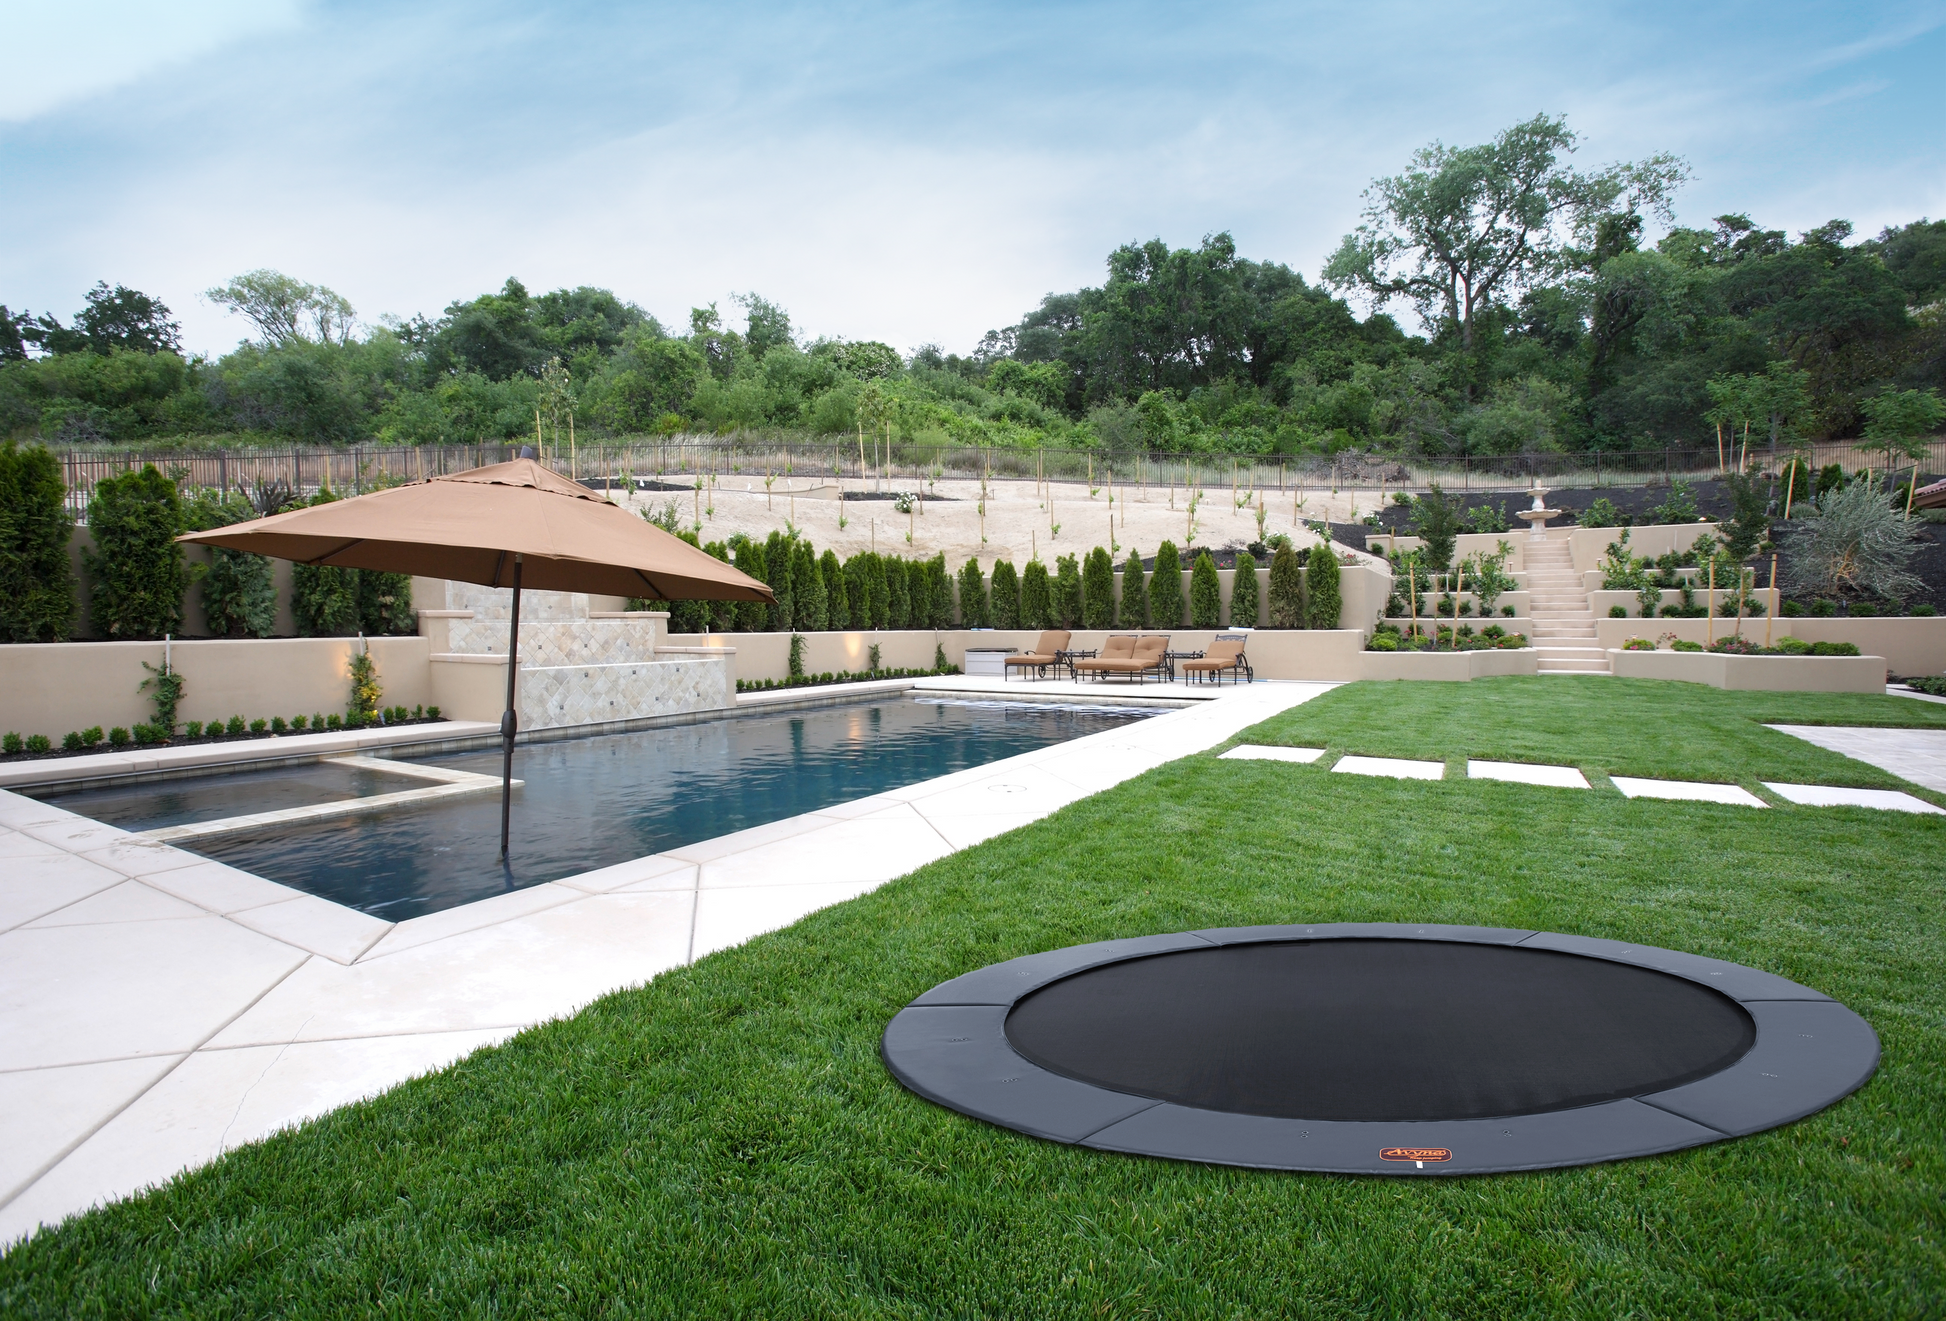 An inground trampoline in a backyard with a pool in the background